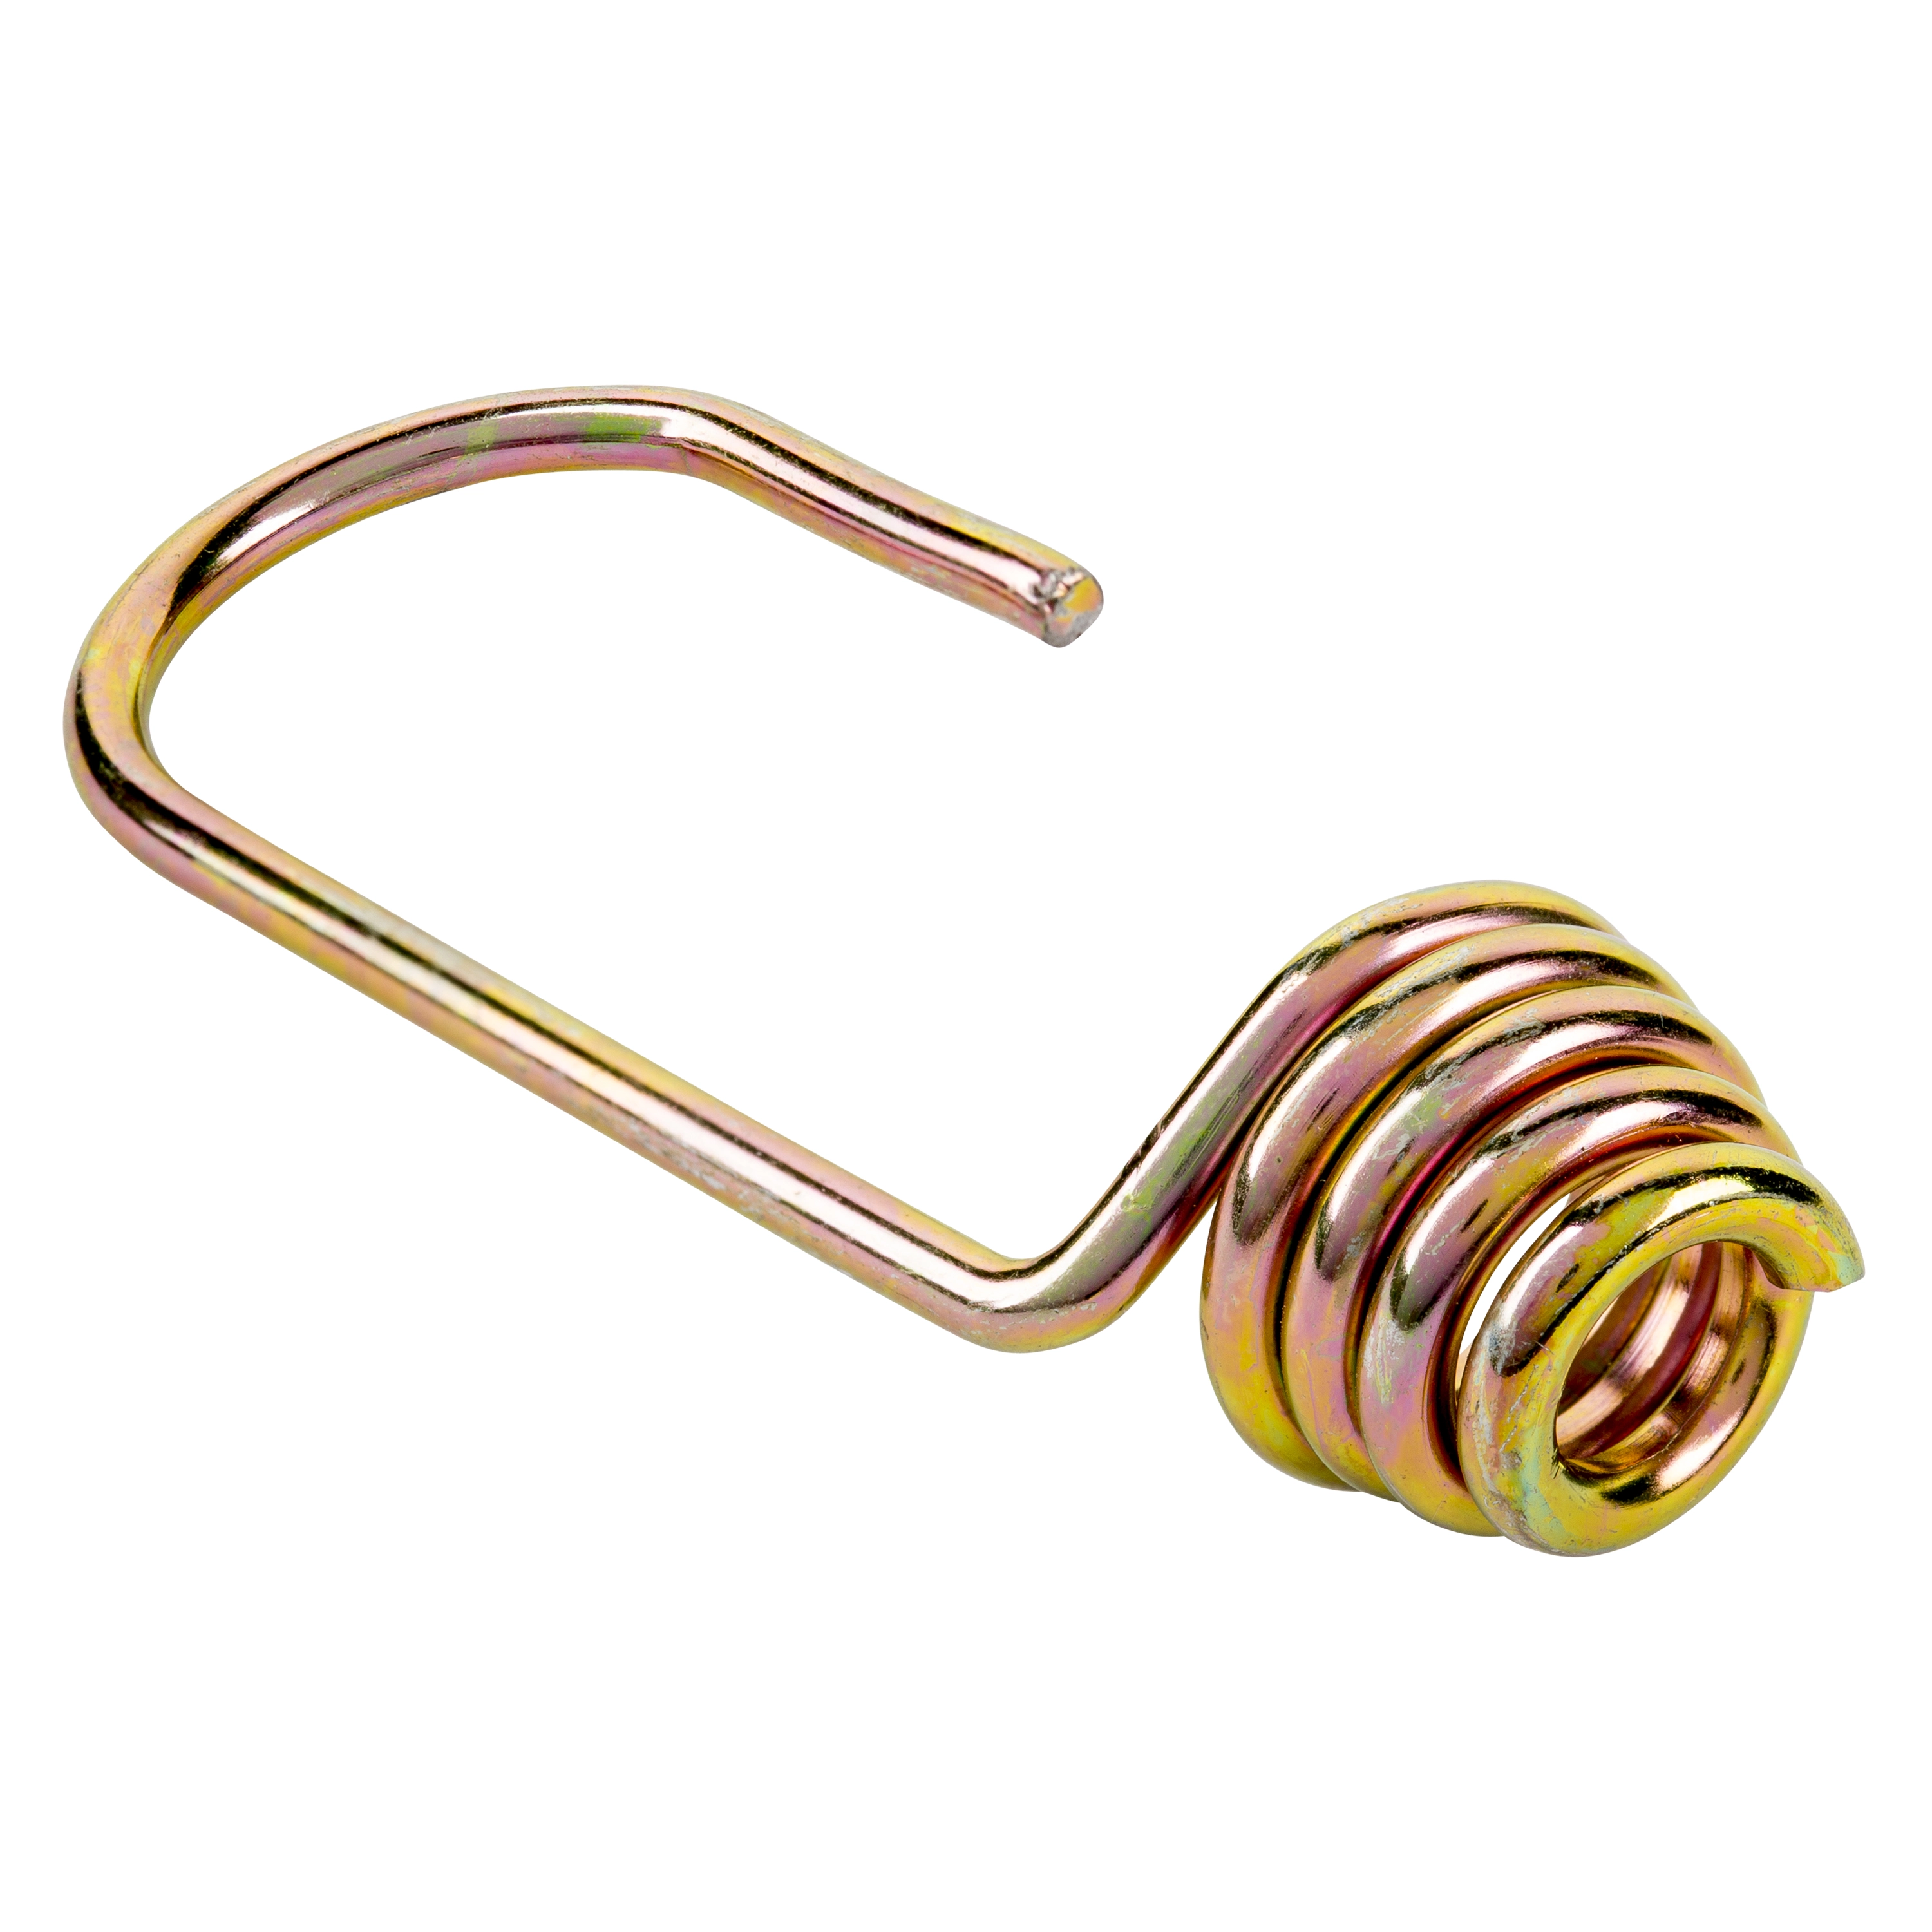 1/4-5/16" Dichromate Bungee Hooks for Bungee Cord variant image view